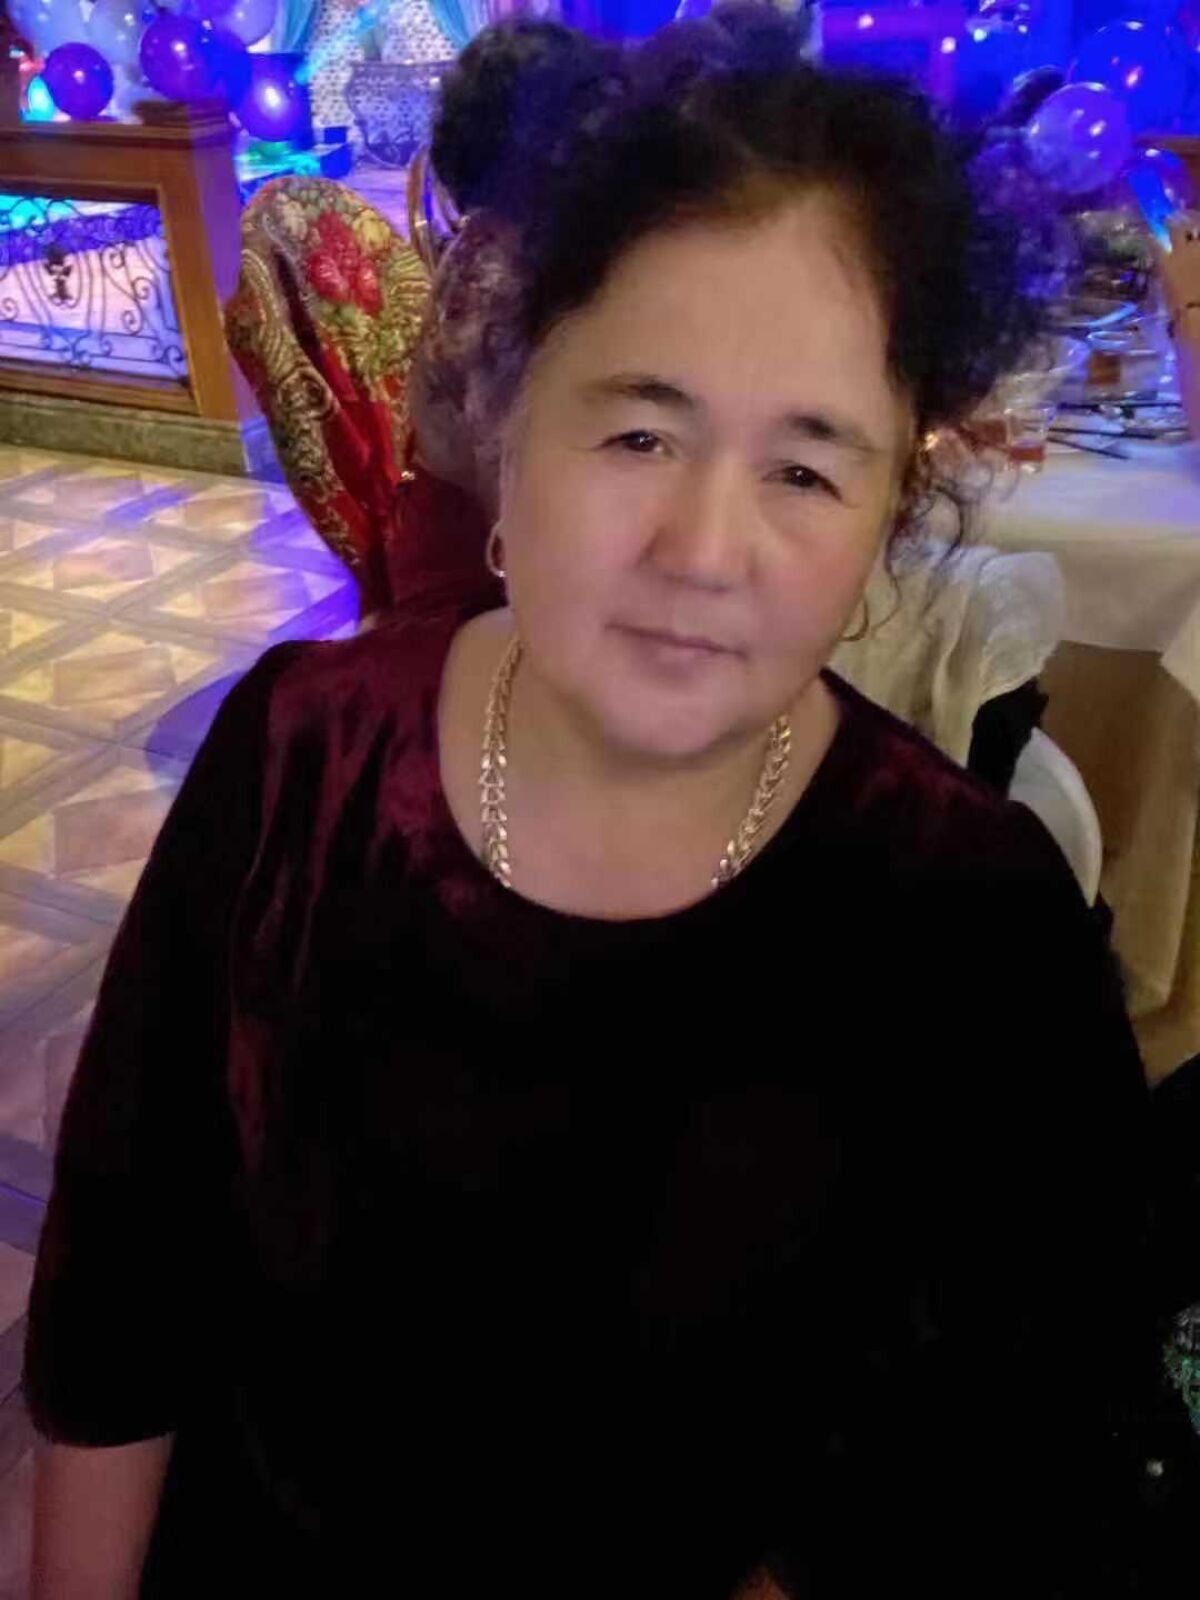 Zulhayat Yaermaimaiti's mother, who lives in Xinjiang, has suffered high blood pressure, heart disease and poor mental health since the detentions of her husband and son. 